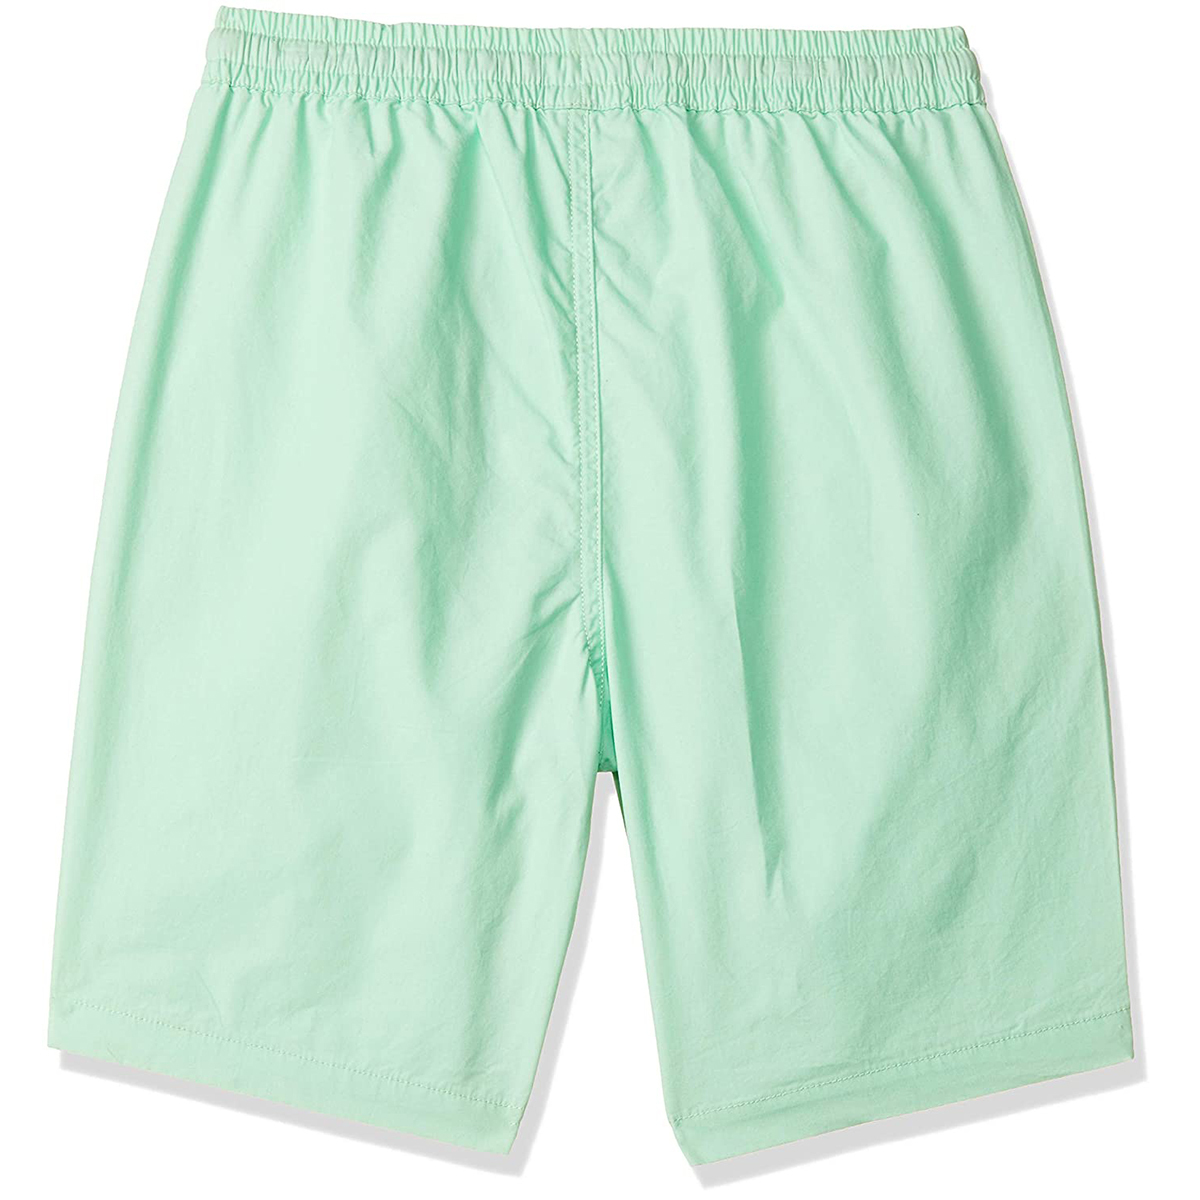 United Colors of Benetton Boy's Regular Fit Cotton Shorts- Green